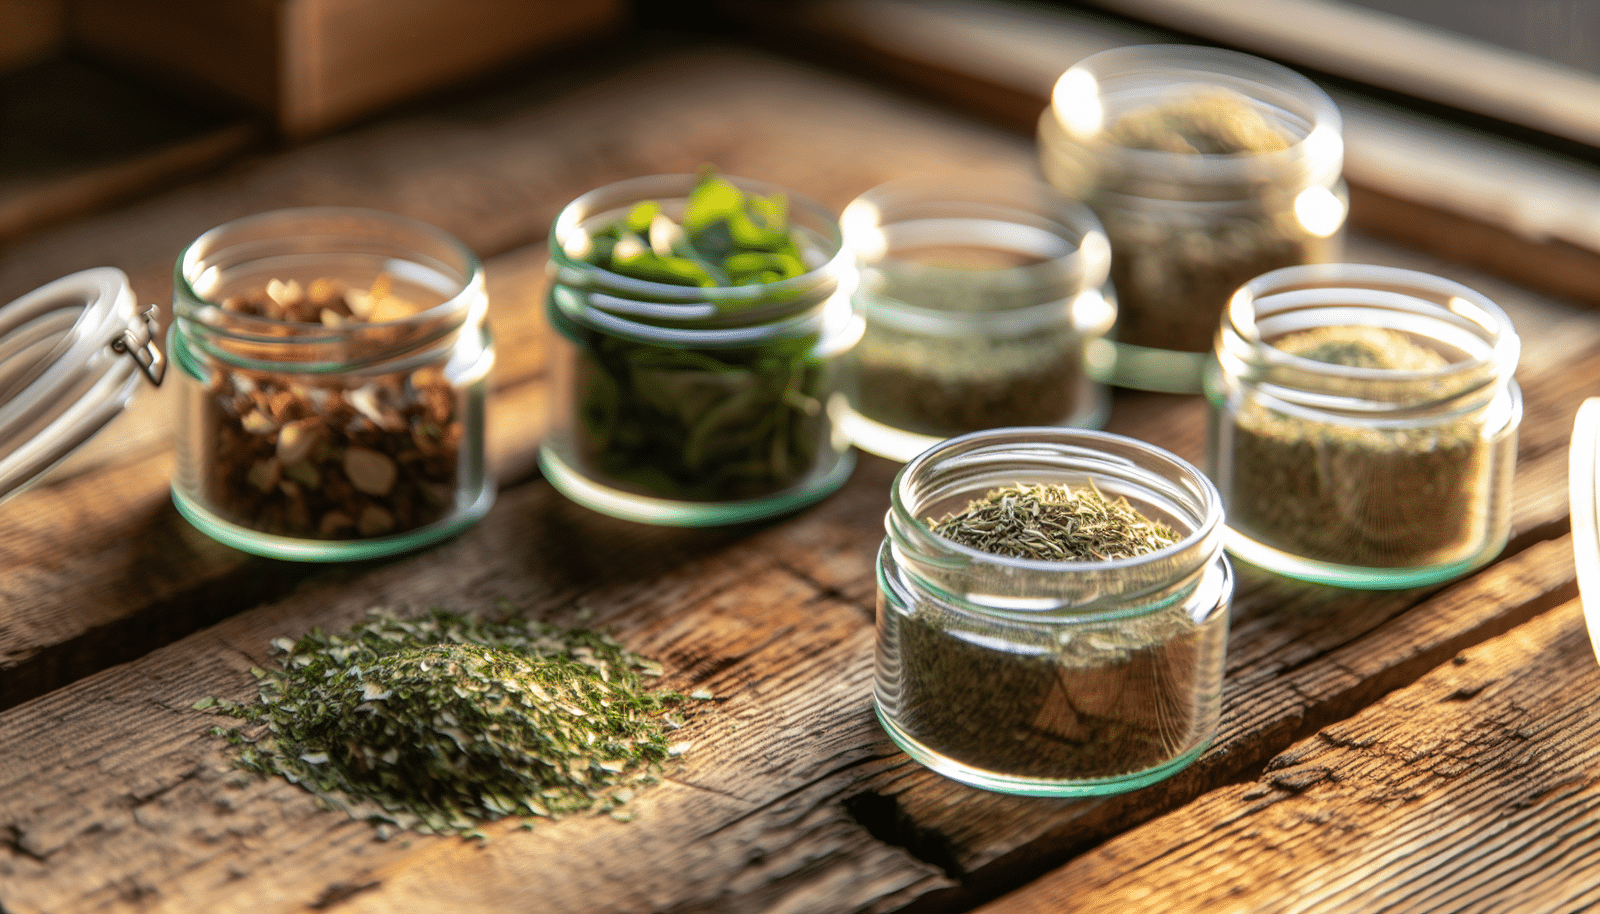 Assortment of dehydrated herbs and spices